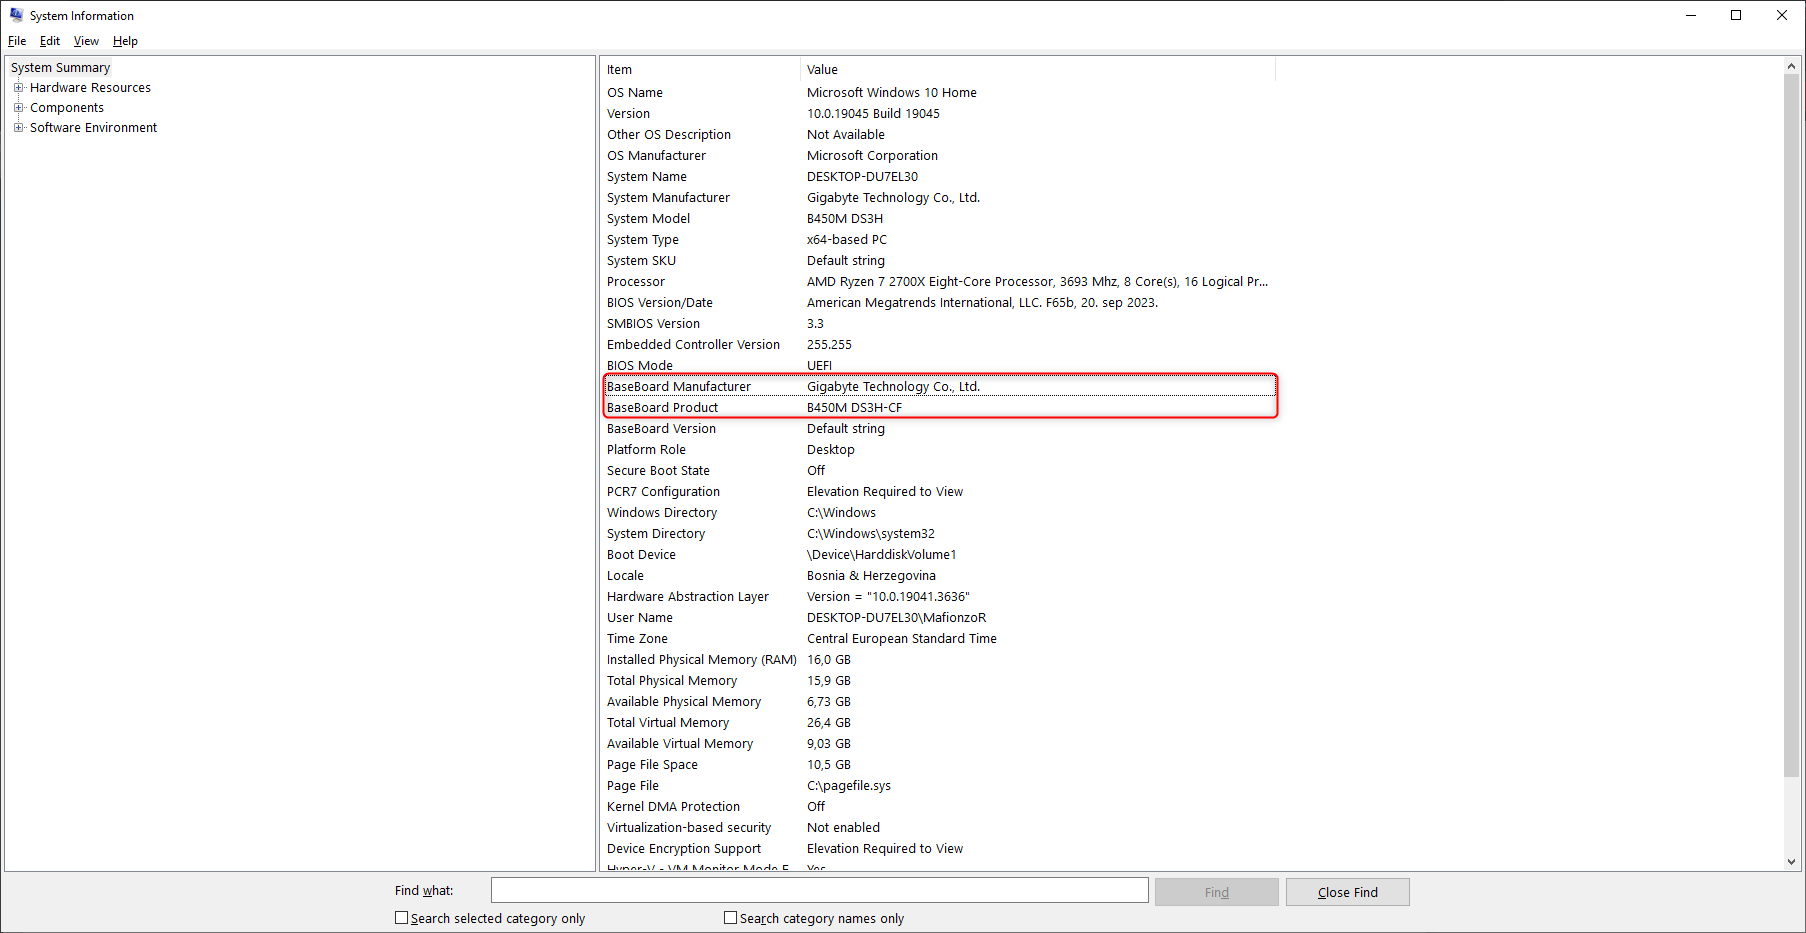 Windows' System Information menu with information detailing the motherboard manufacturer and model name.